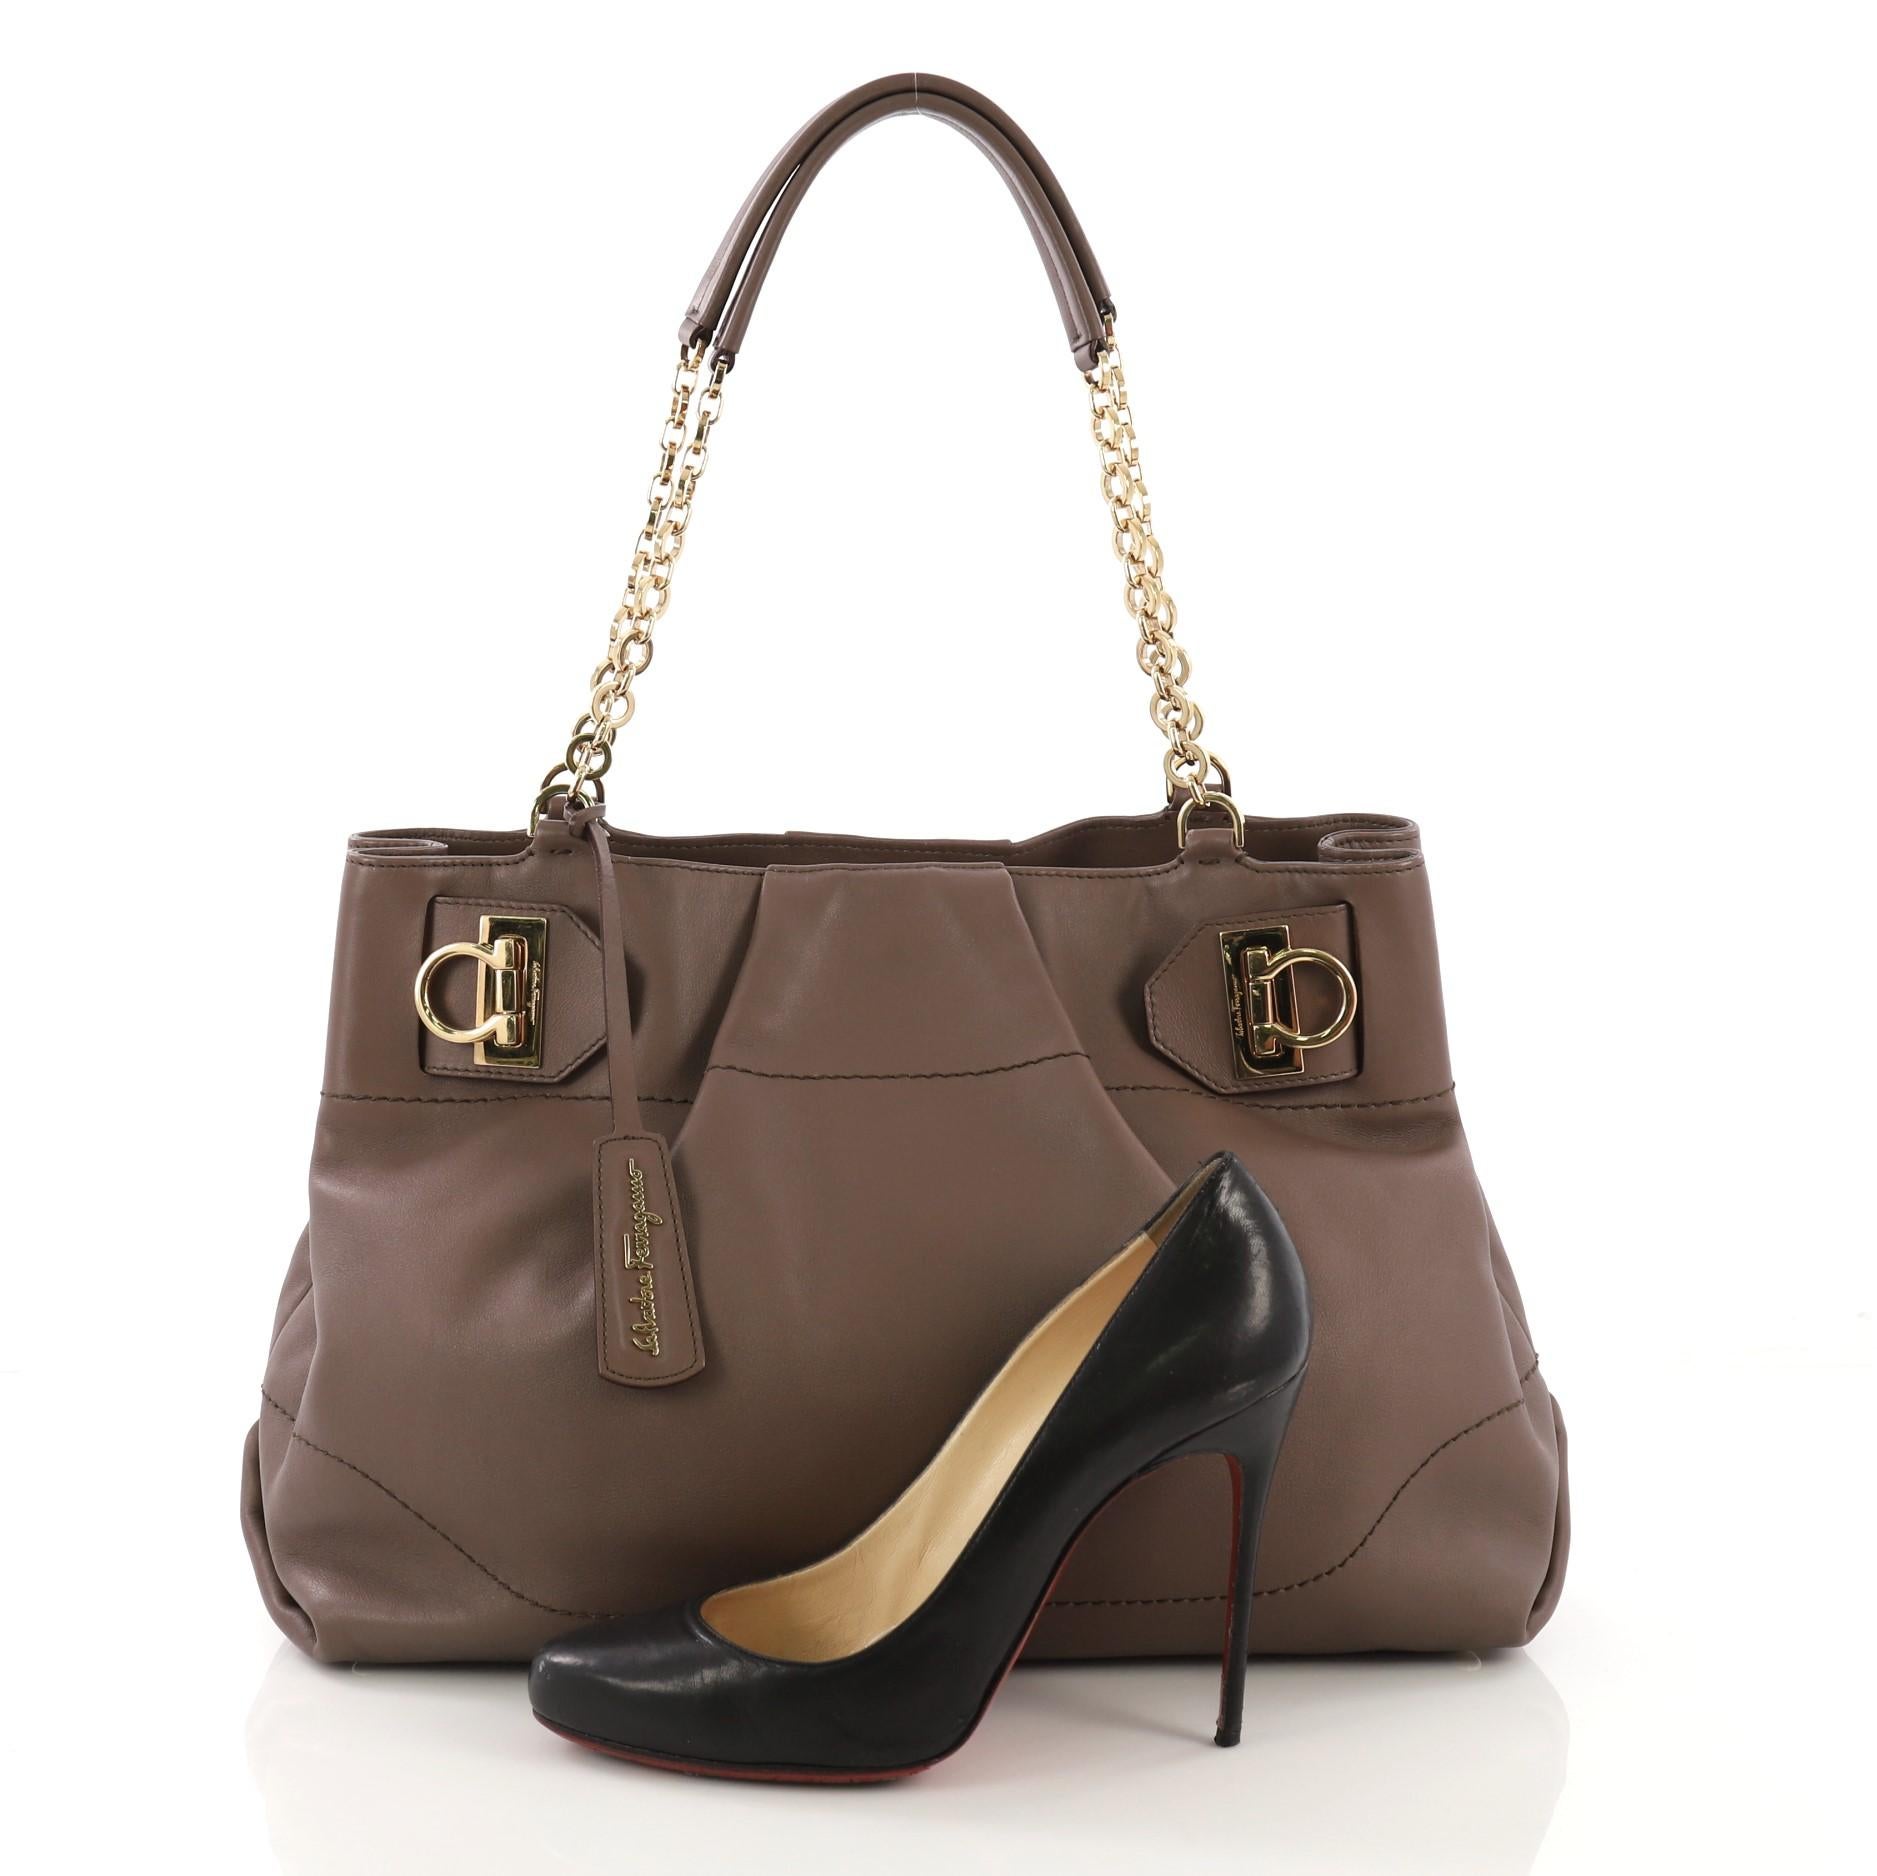 This Salvatore Ferragamo W Chain Tote Leather Large, crafted in taupe leather, features dual chain straps with leather pad, signature polished gold Gancini clasps for a secure closure, protective base studs, and gold-tone hardware. Its brown